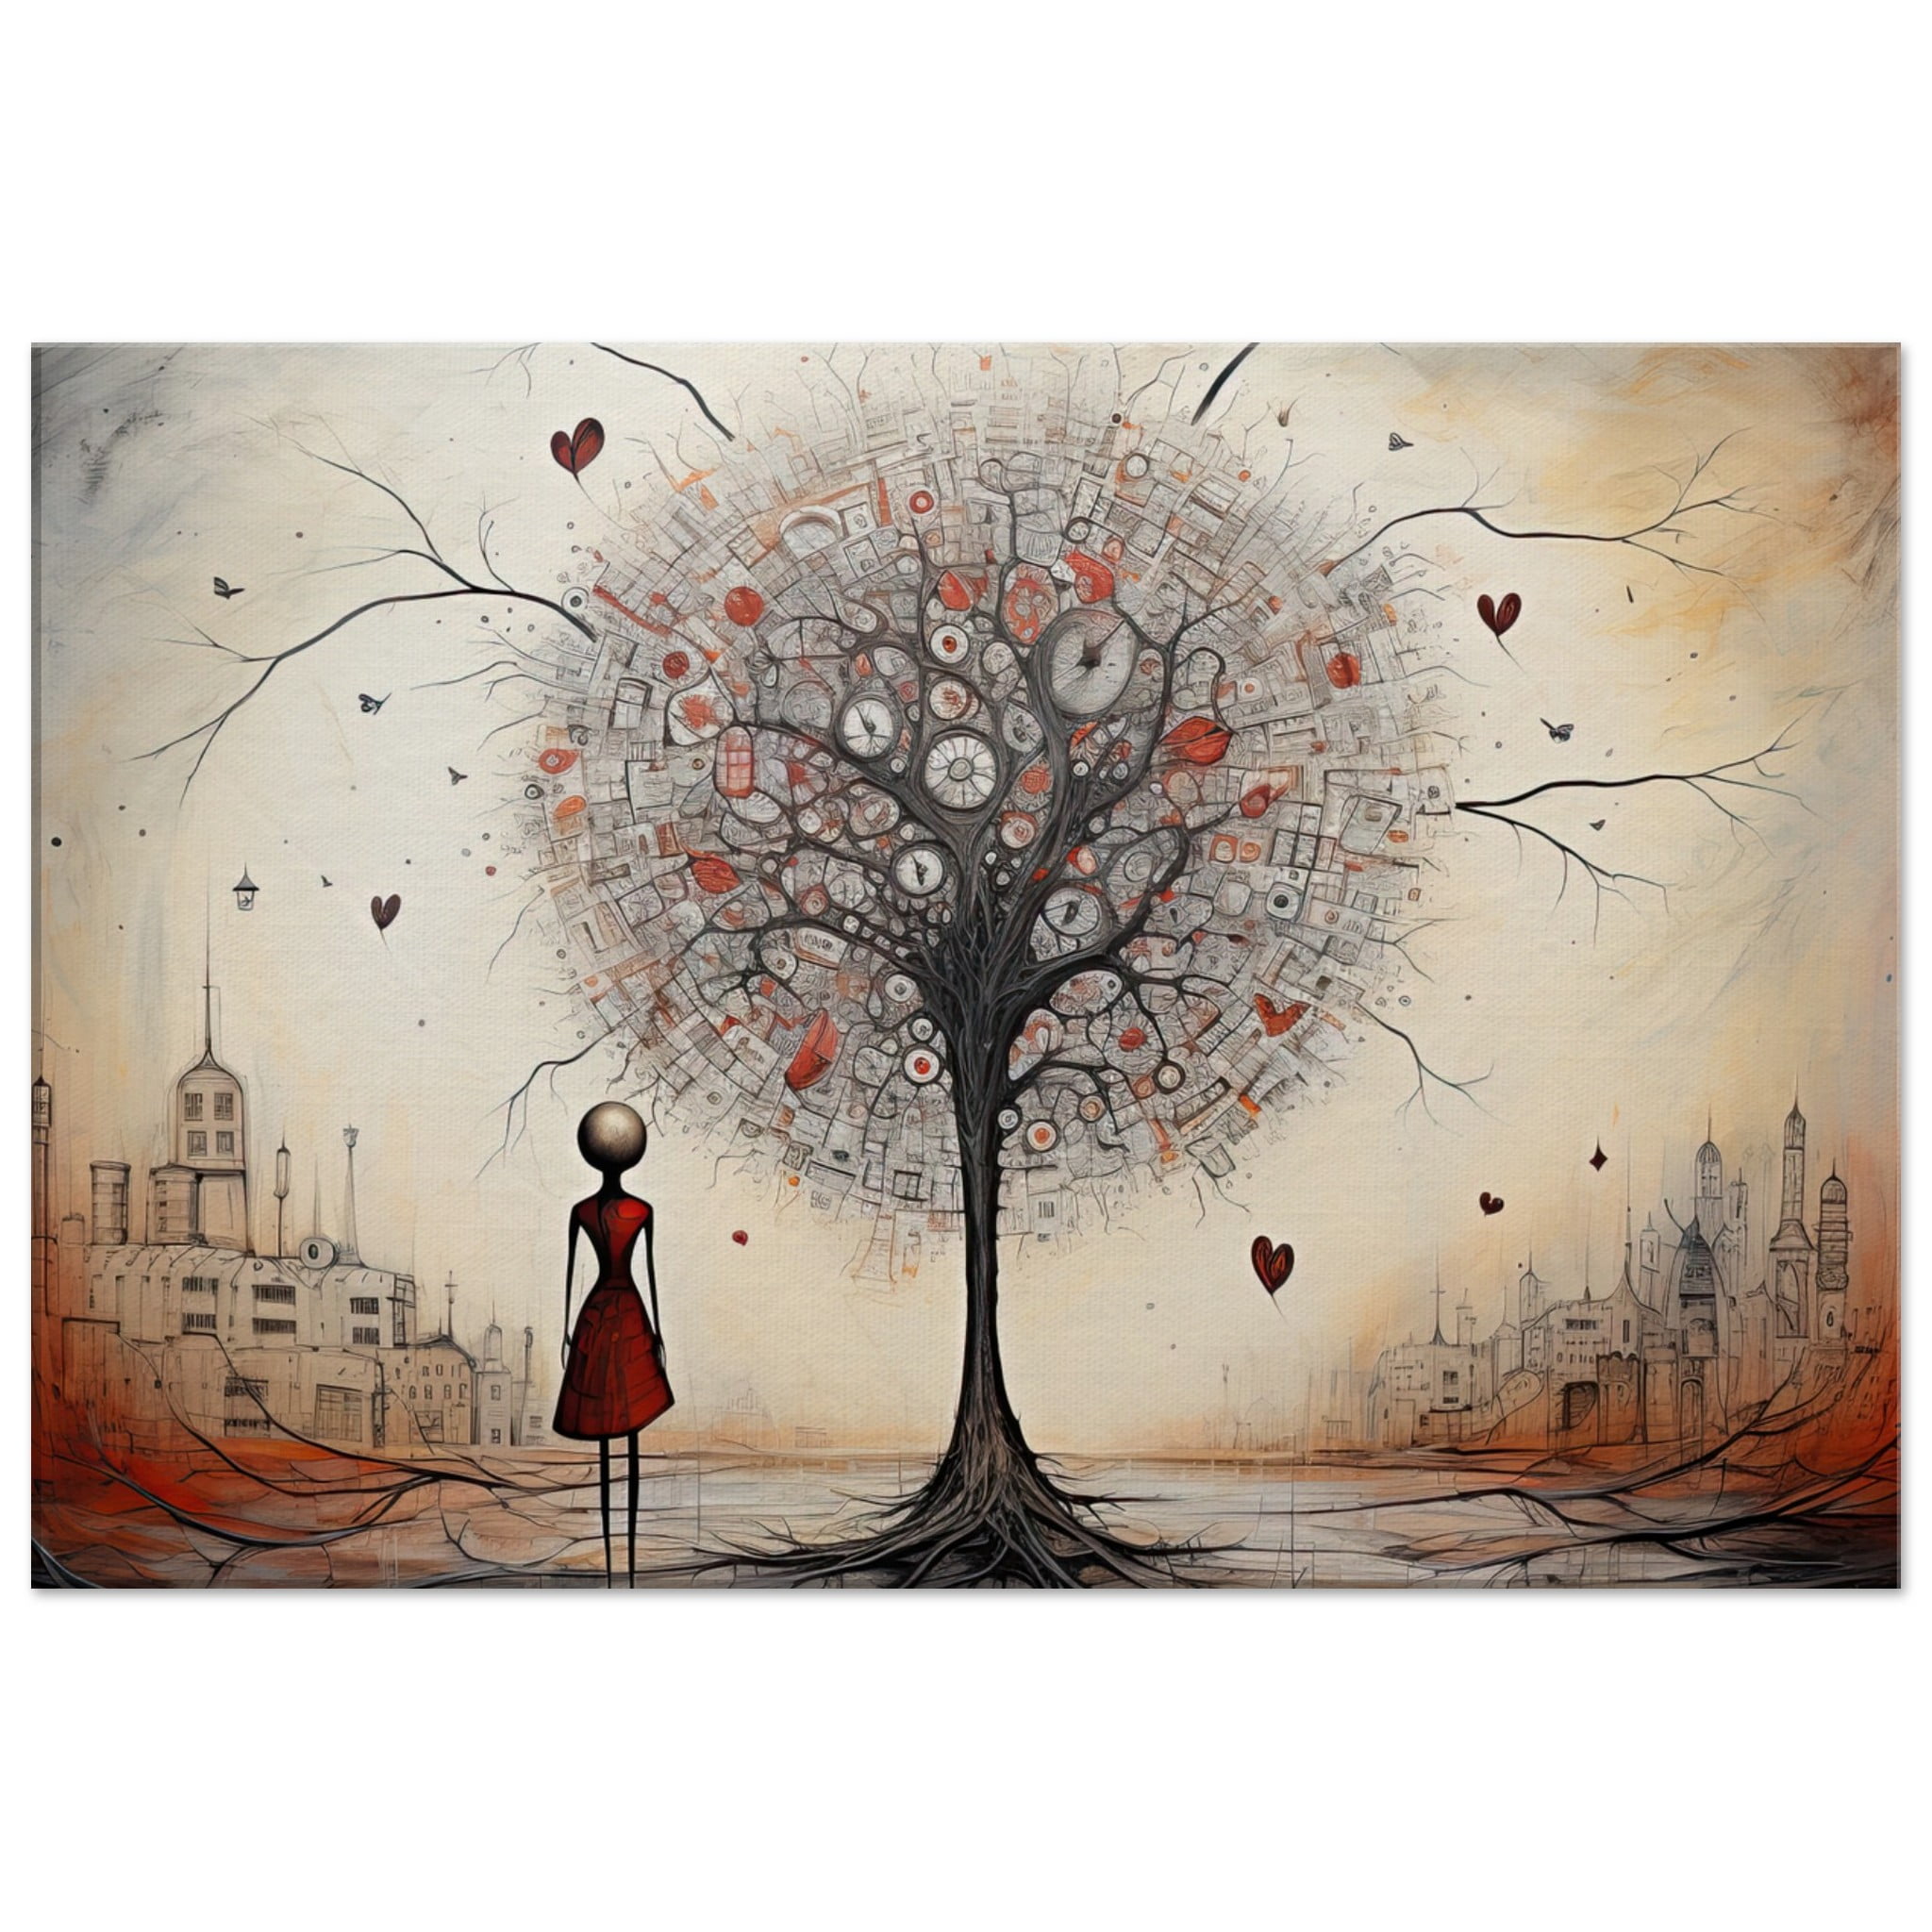 Heart Tree of Desire – Abstract Art Canvas Print – 50×75 cm / 20×30″, Thick